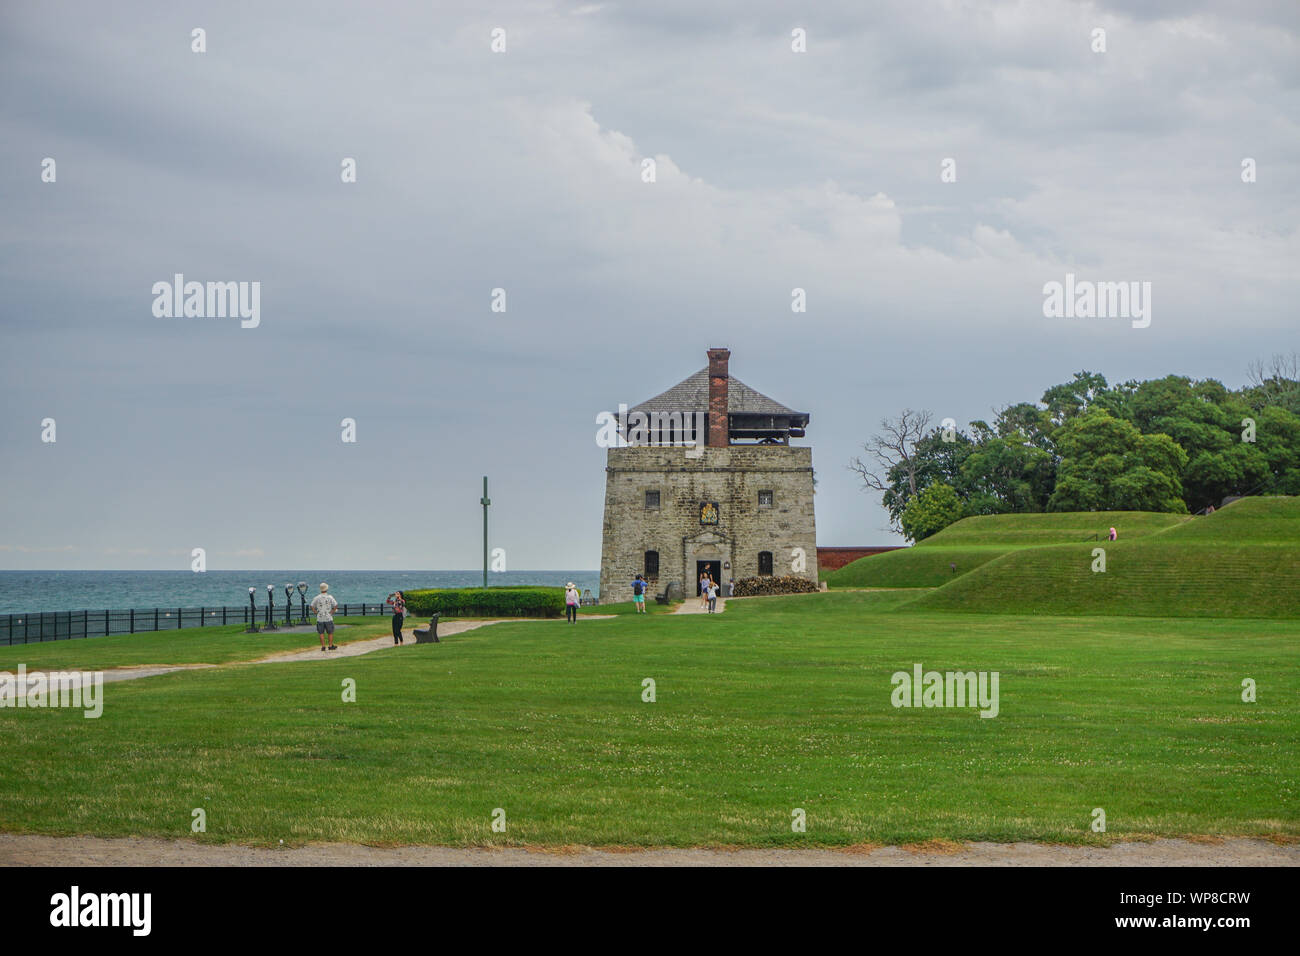 Porter, New York, USA: Visitors at the North Redoubt on the 23-acre grounds of Old Fort Niagara, on a cloudy day on Lake Ontario. Stock Photo